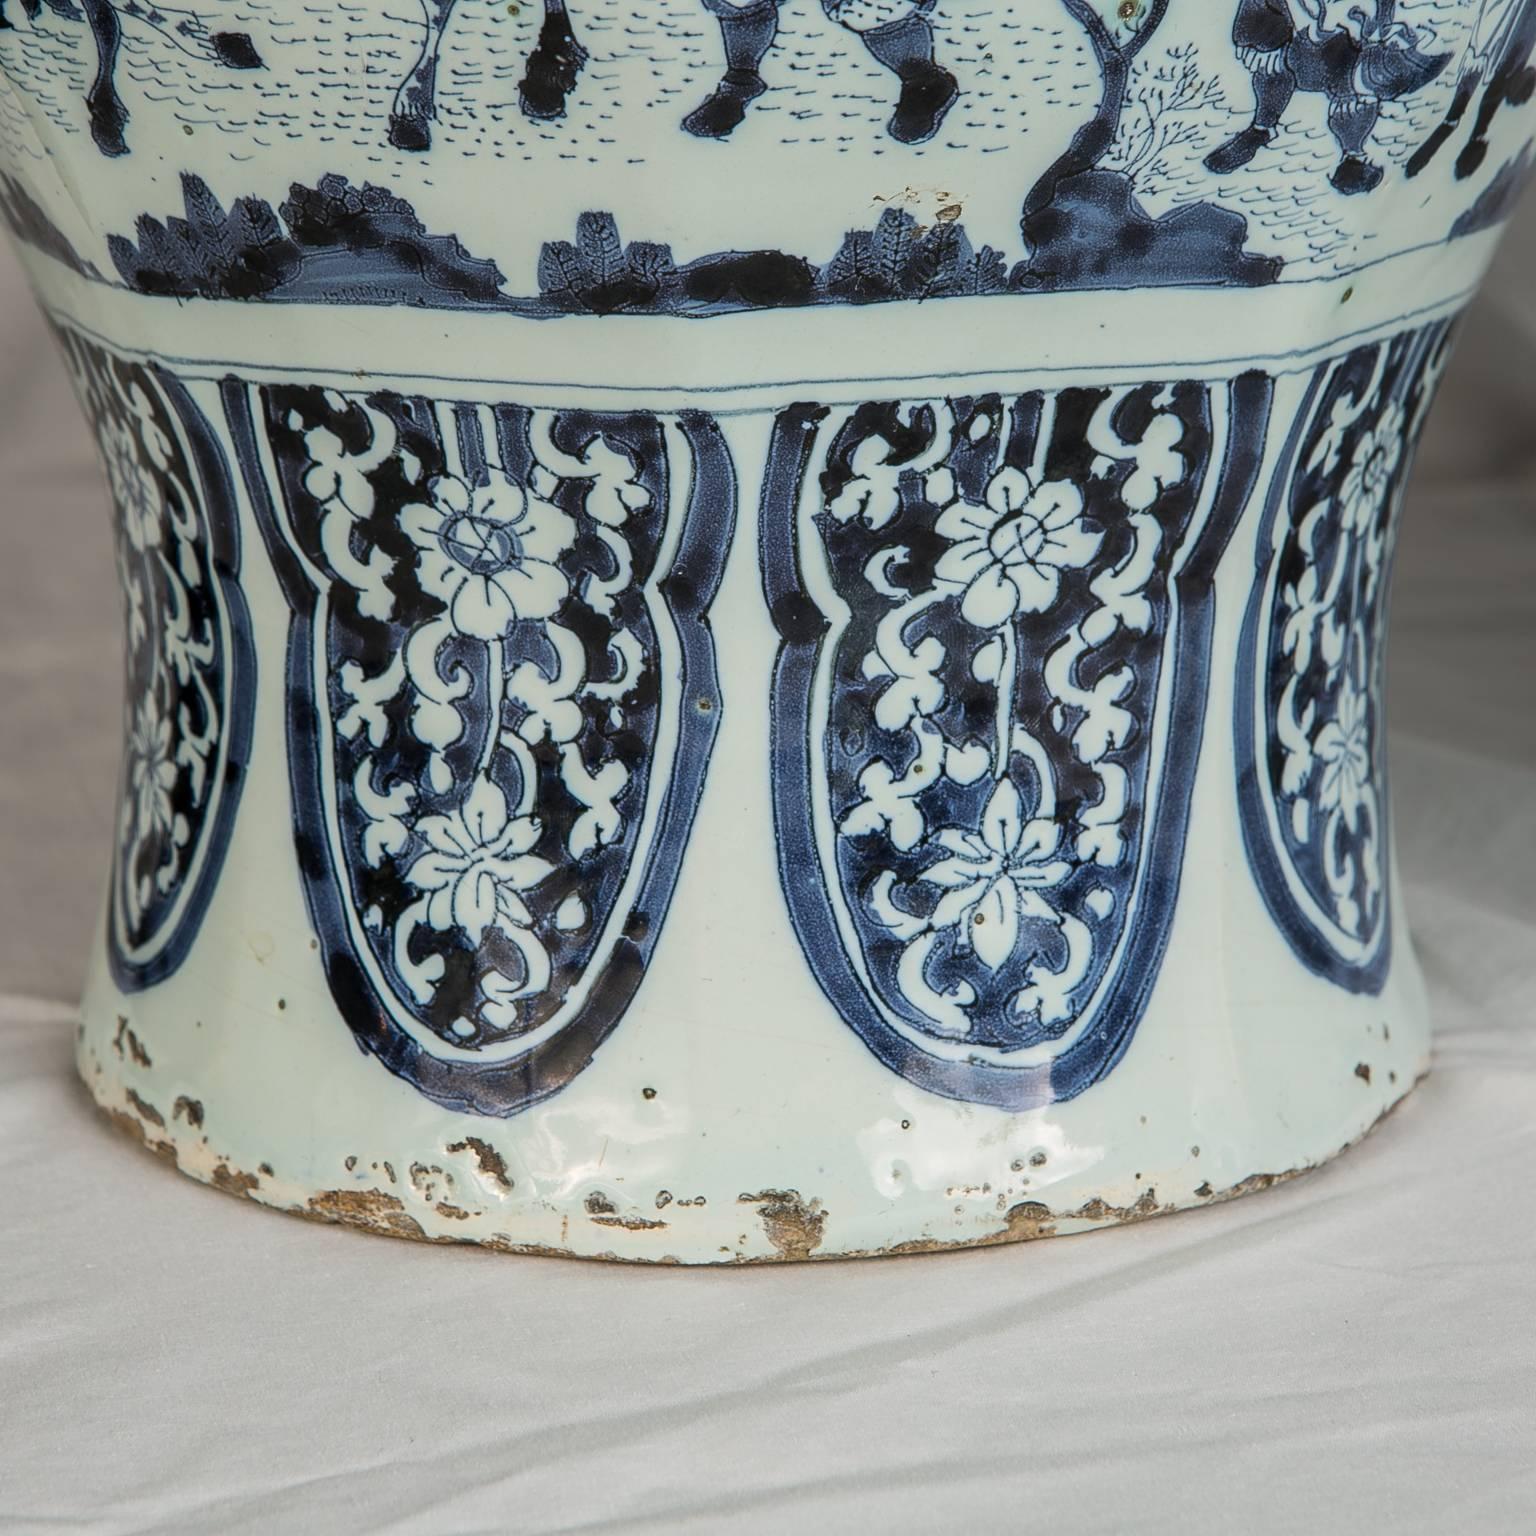 Chinoiserie Large Pair of Antique Delft Blue and White Vases Made circa 1700-1720